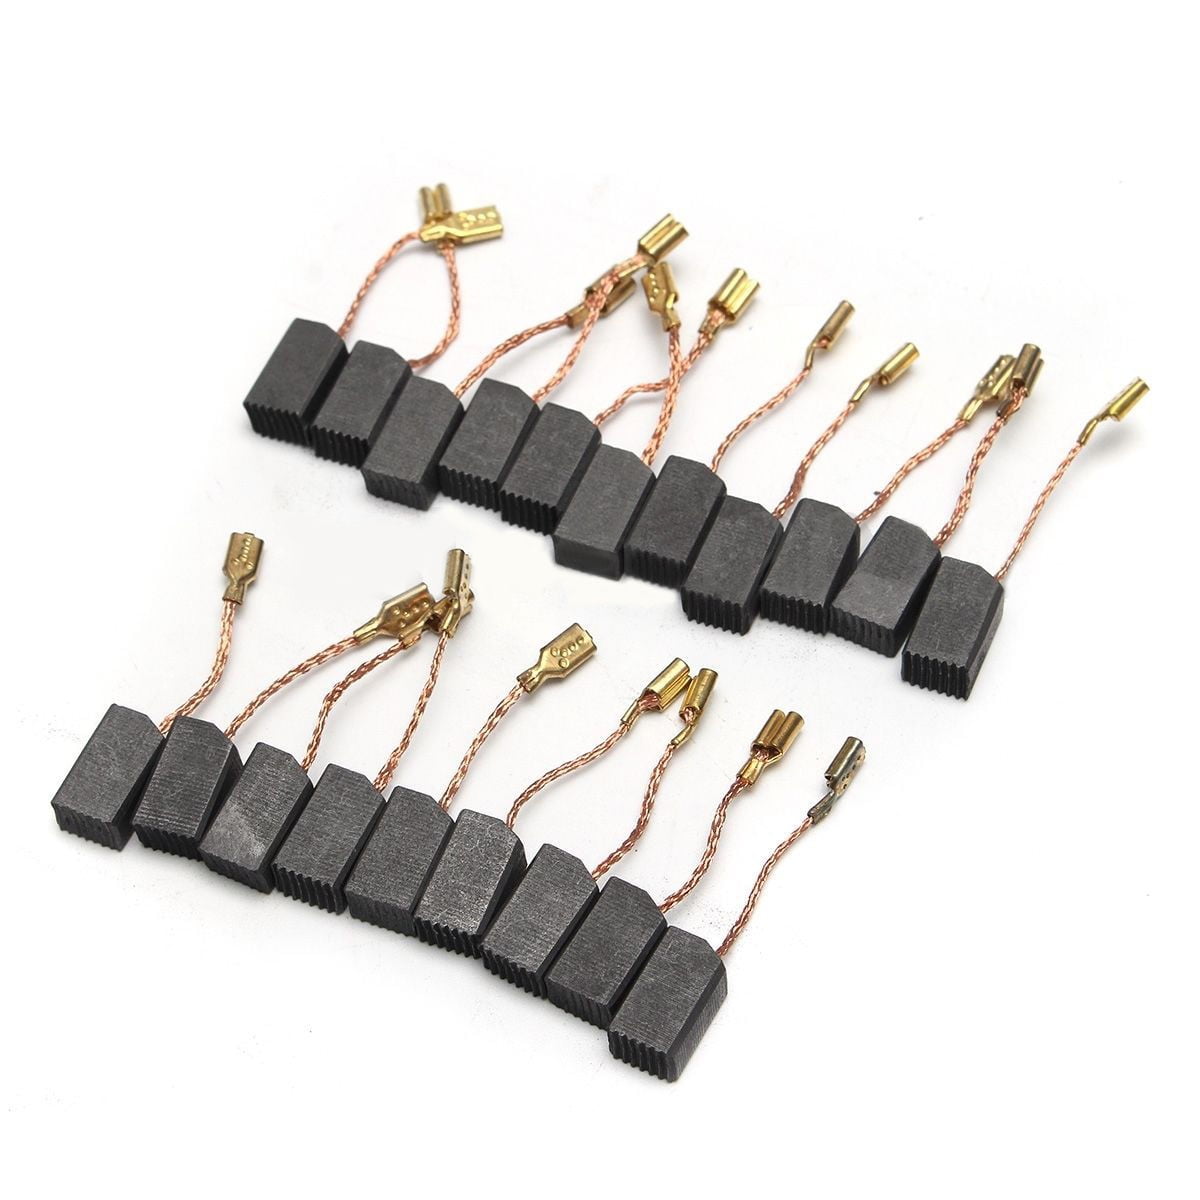 20 Pcs/Set Motor Carbon Brushes Kits Copper Wire Power Tool Repair High Quality 